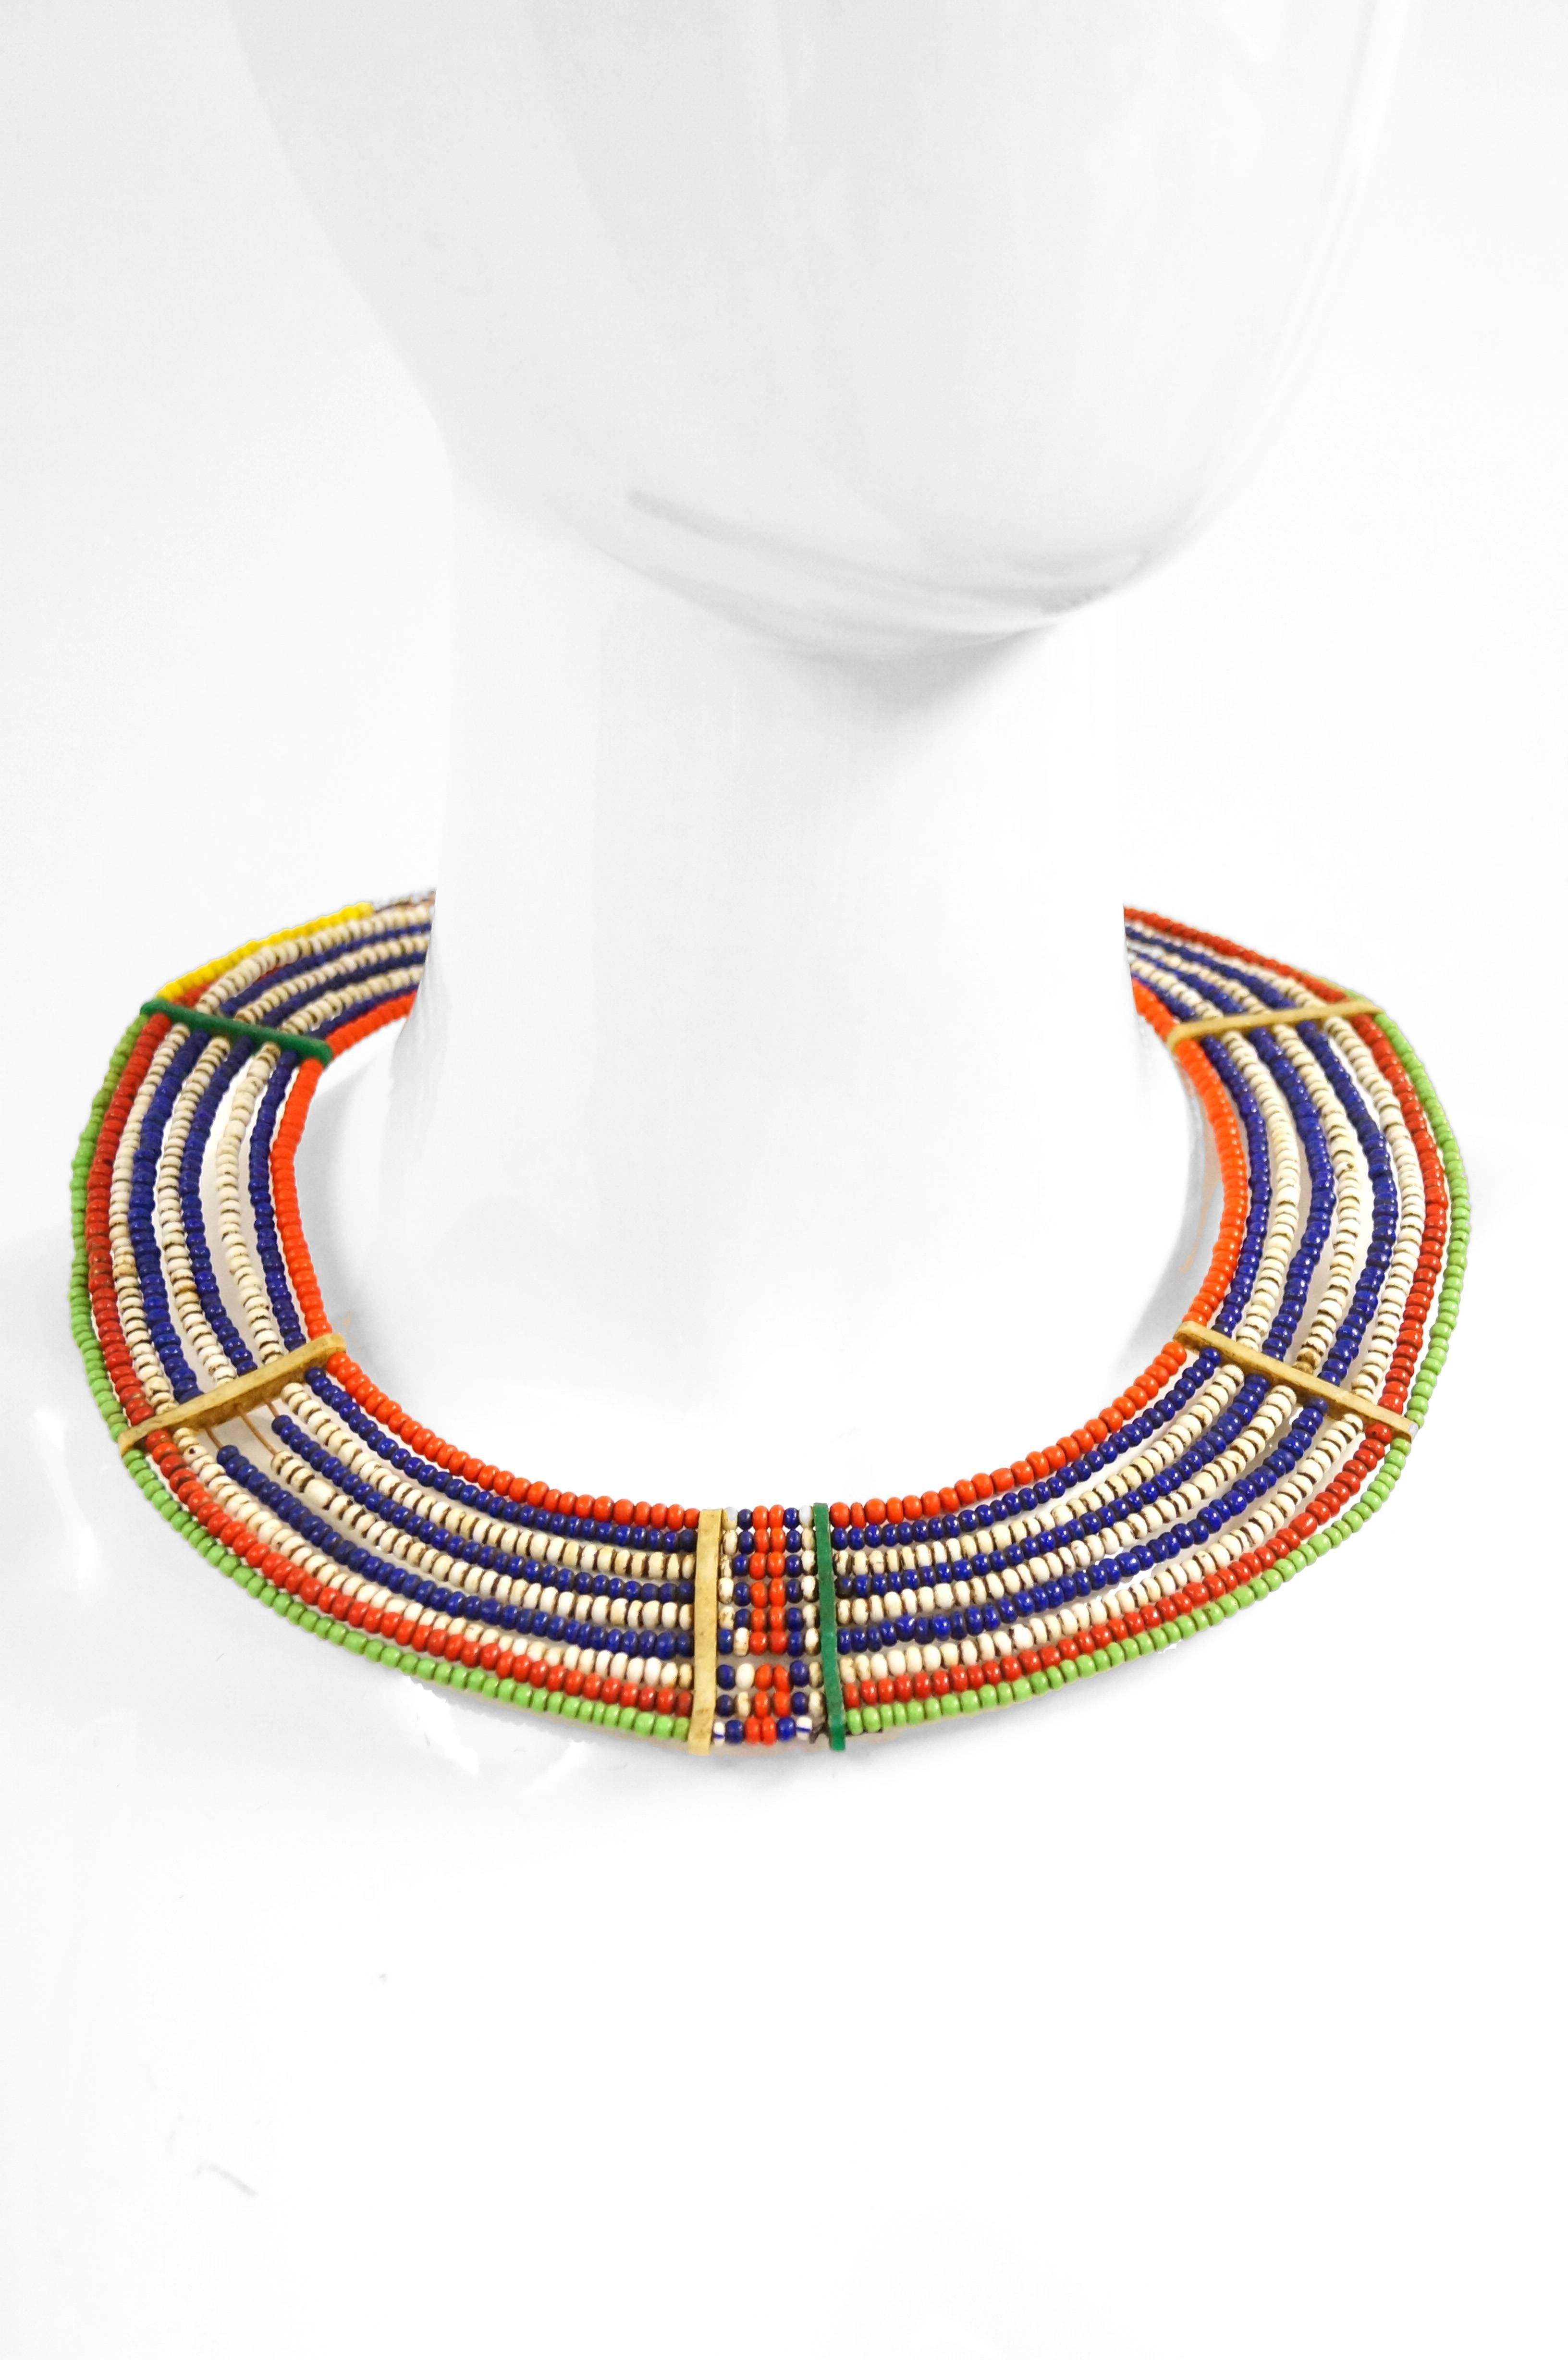 Beautiful colorful circular tribal collar necklace. Necklace is composed of seed beads in red, white, blue, green, and white - blue stripes. Bone bead in center as connecting point. Hook closure.

*Samburu tribe, Kenya.